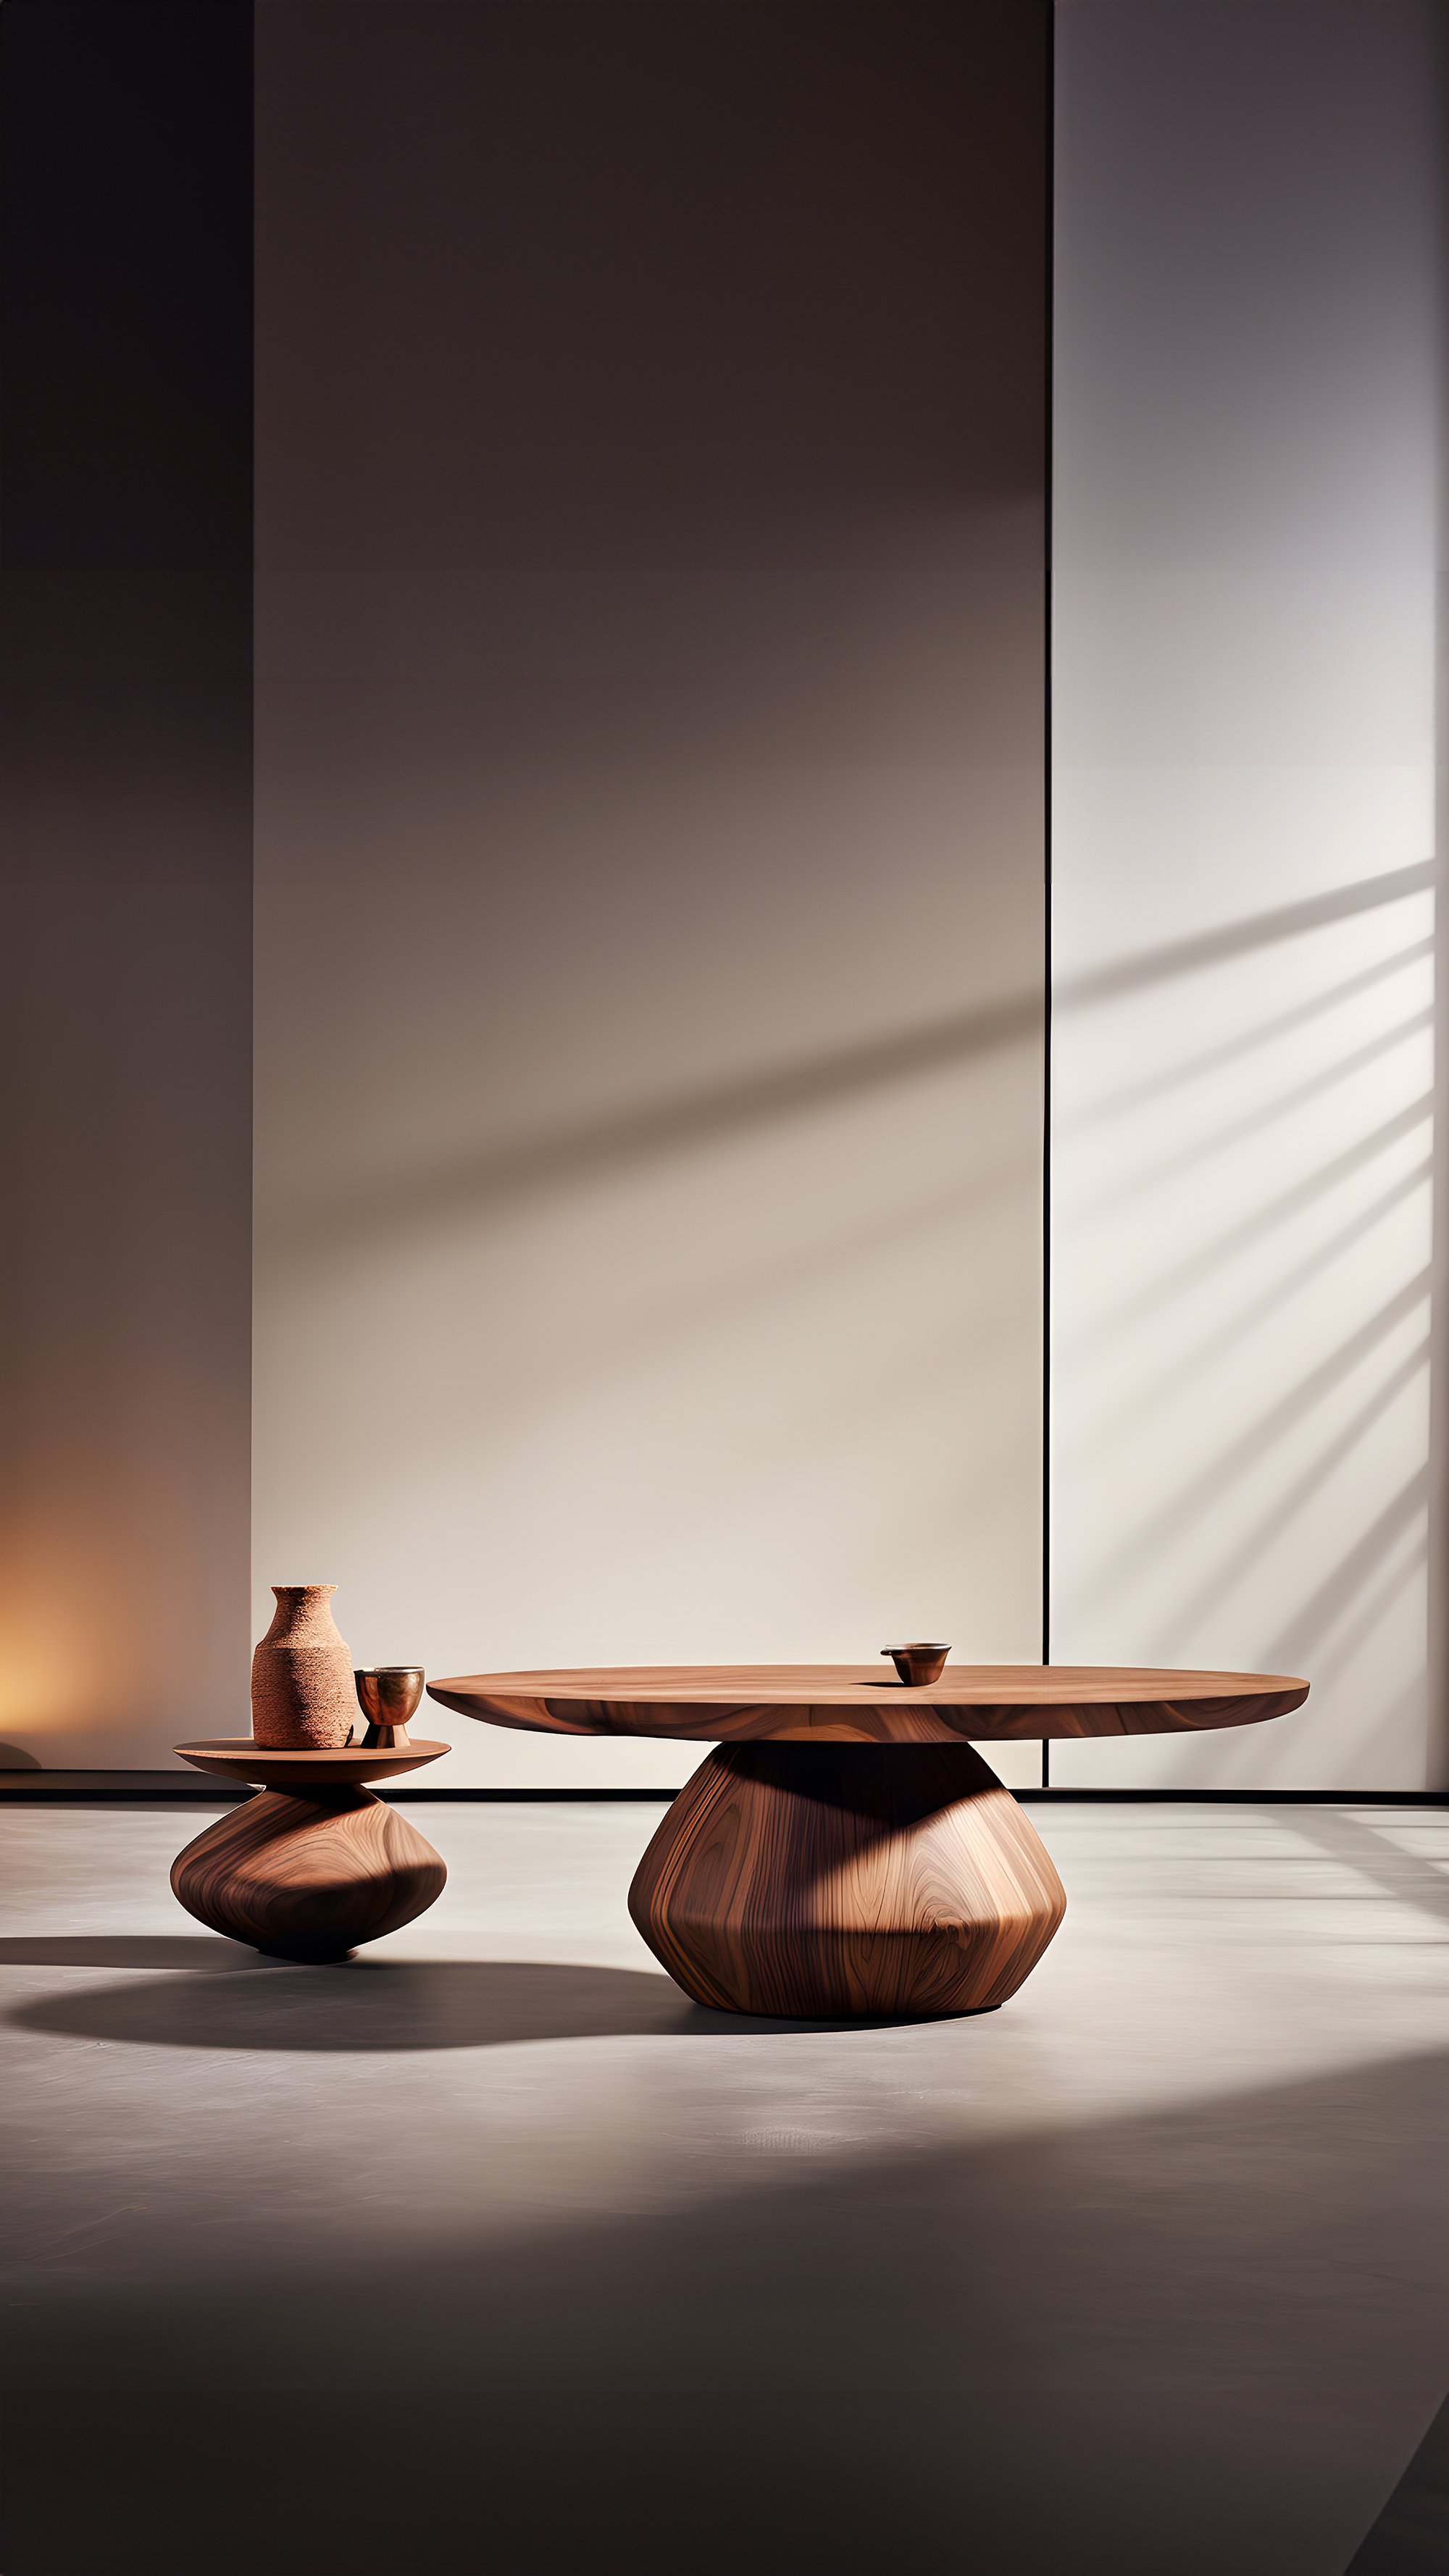 Sculptural Coffee Table Made of Solid Wood, Center Table Solace S42 by Joel Escalona — 7.jpg